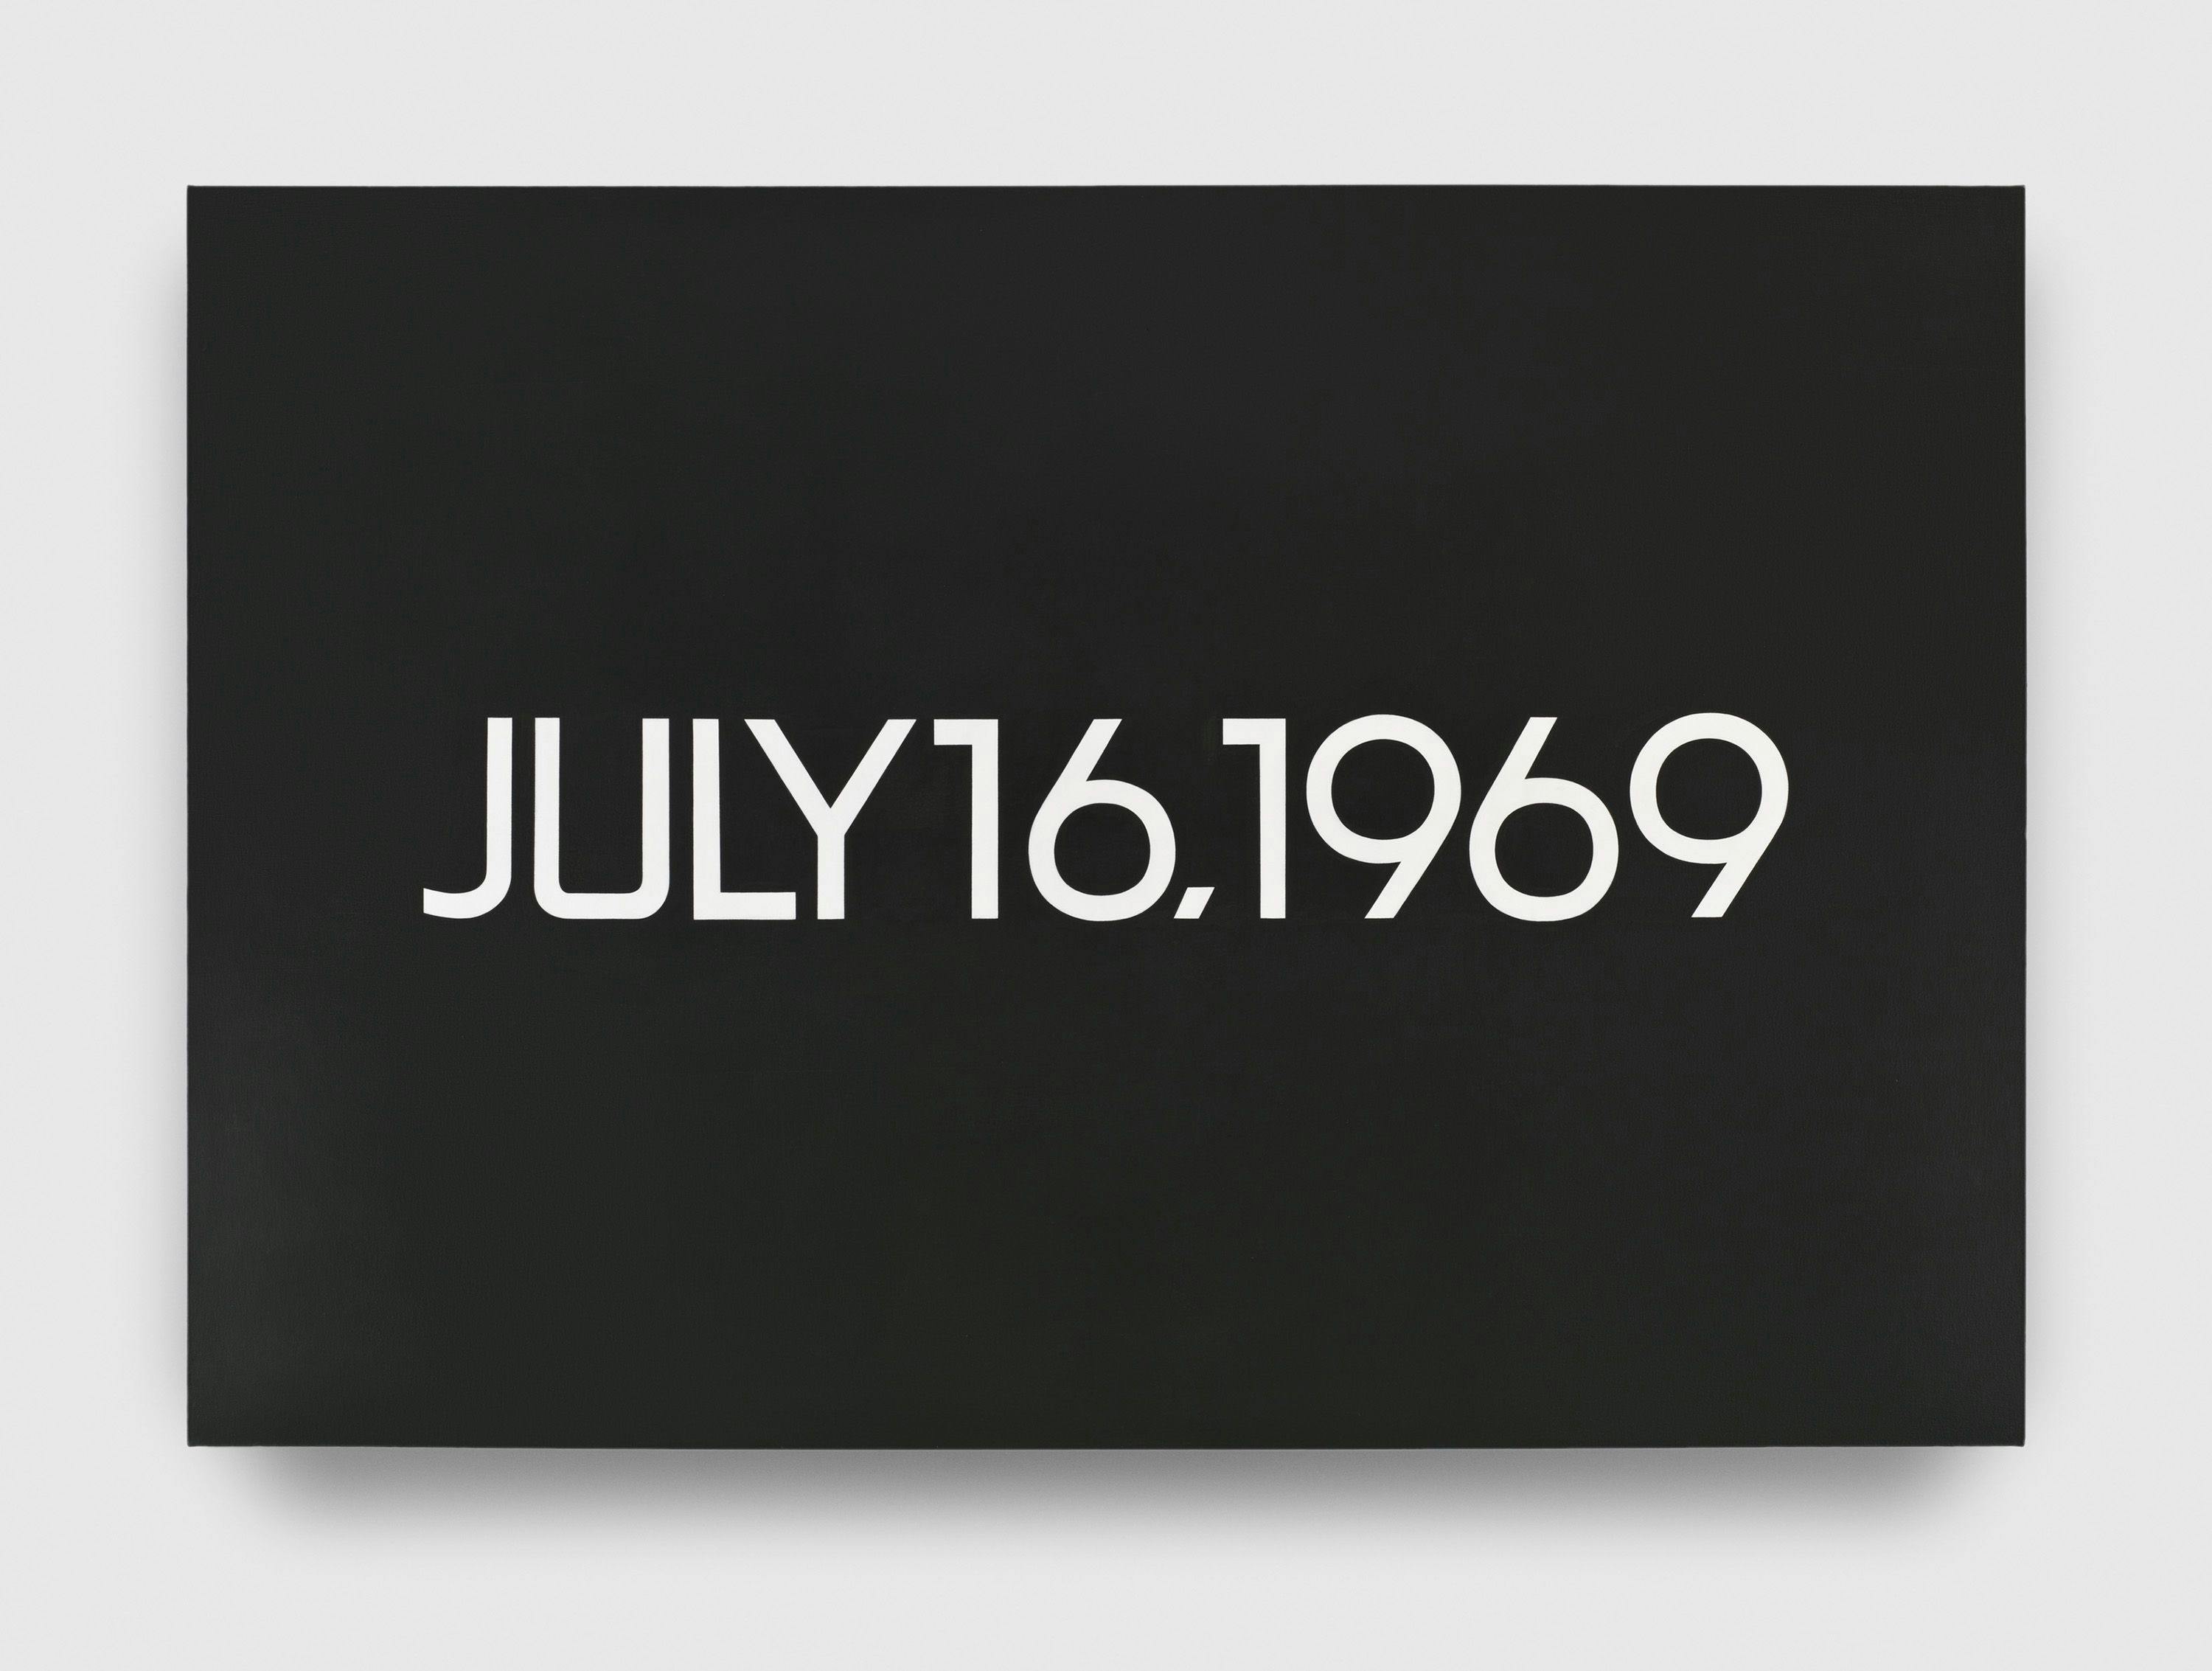 A painting by On Kawara, titled July 16, 1969, dated 1969.